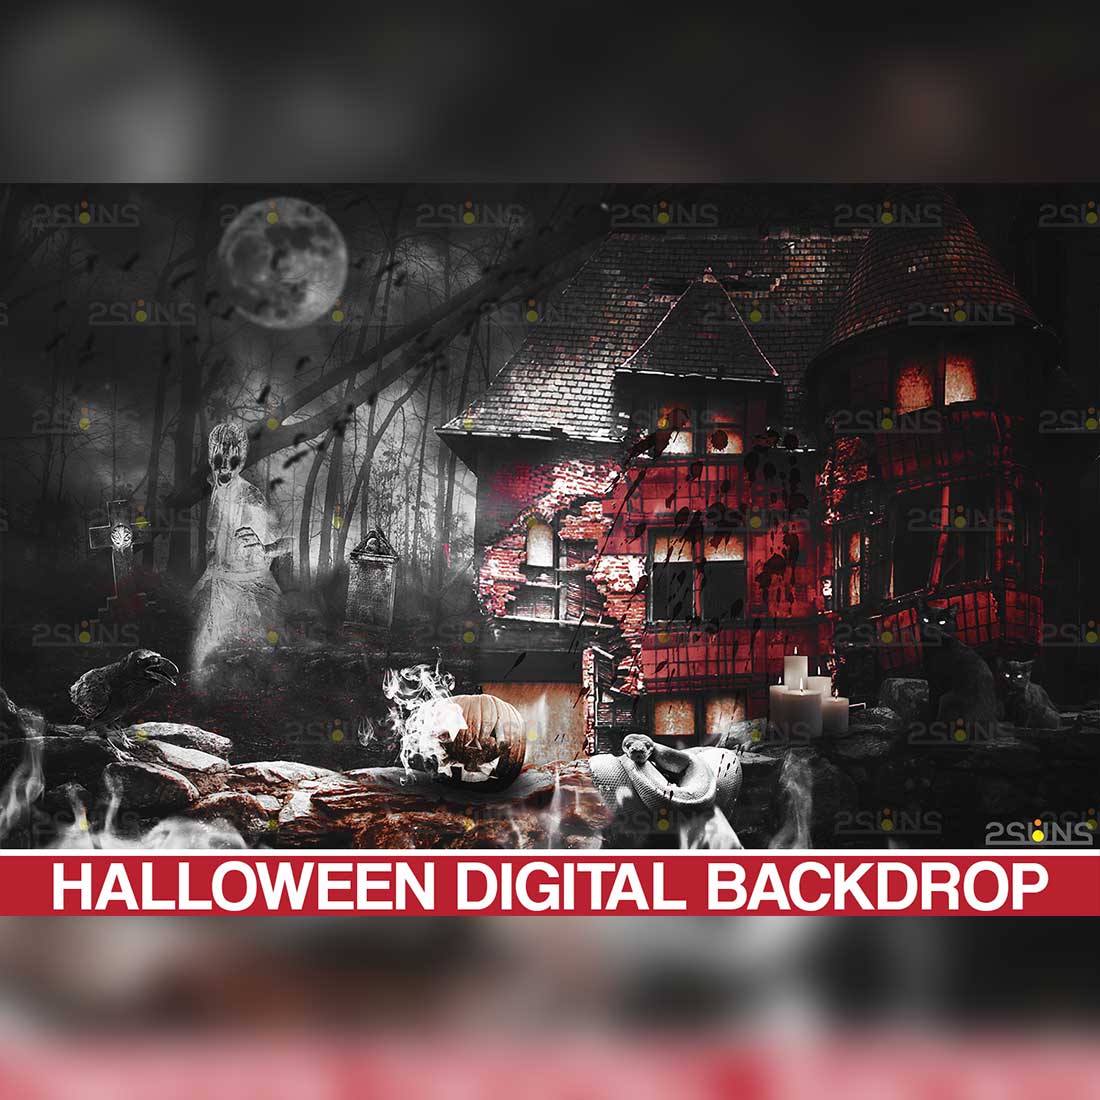 Scary Halloween Backdrop background Facebook Image.